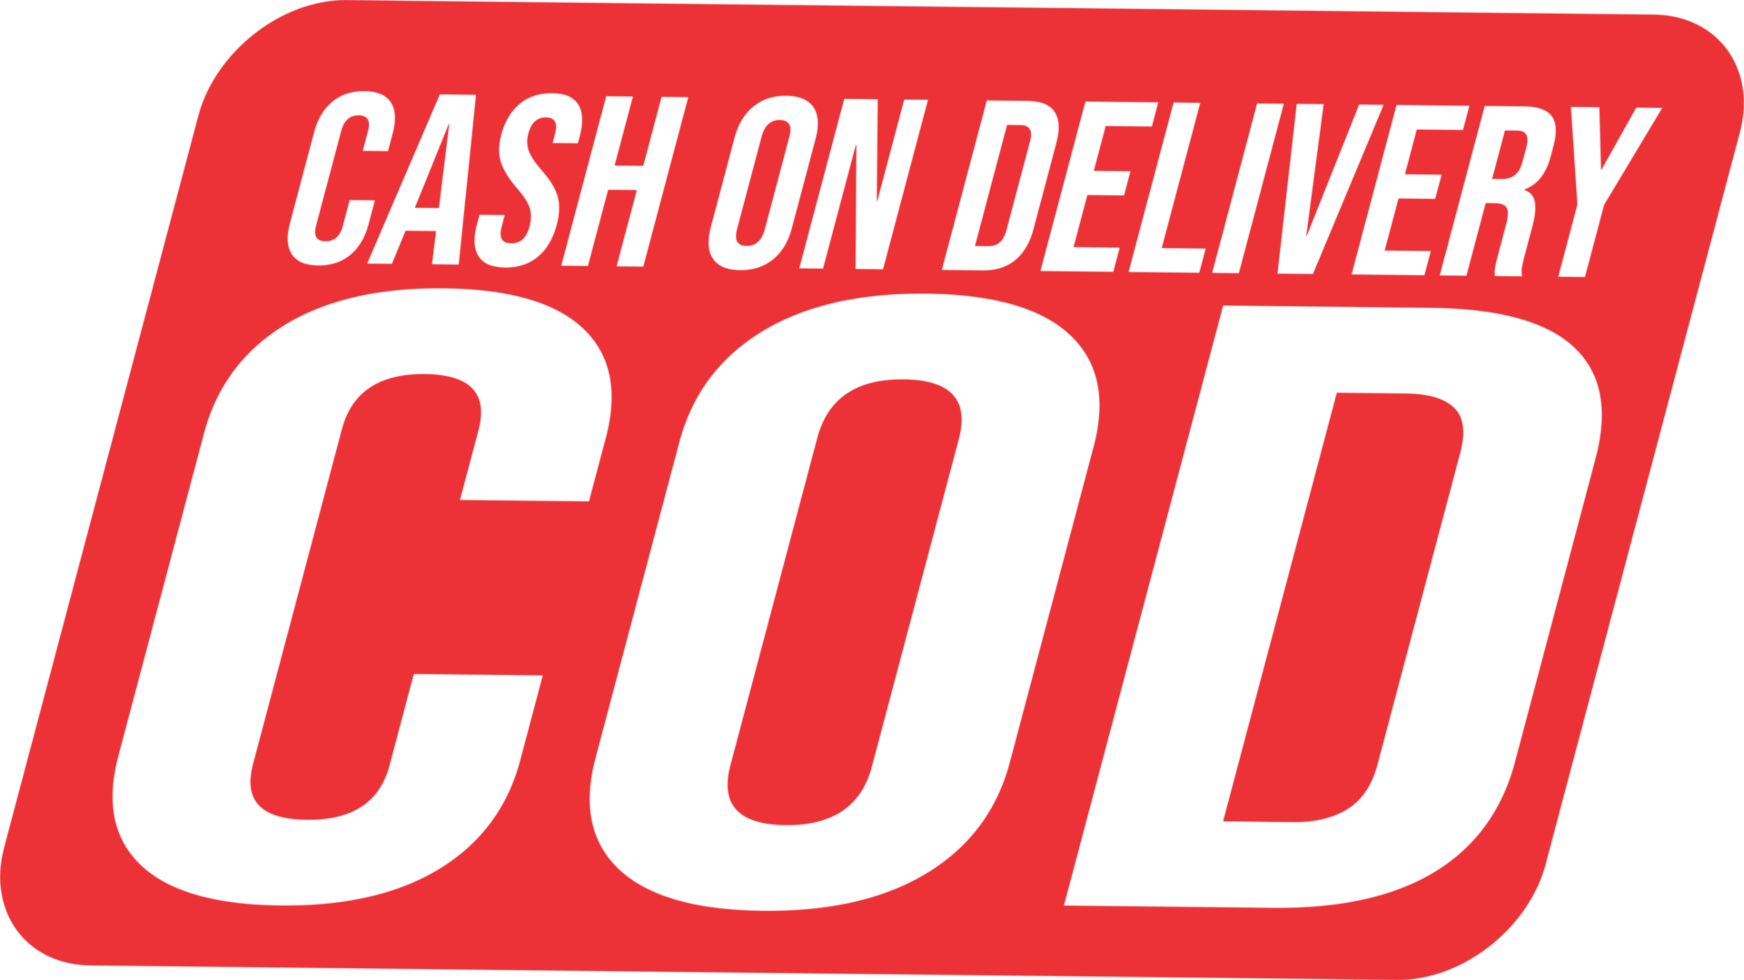 cash-on-delivery-logo-free-png.png